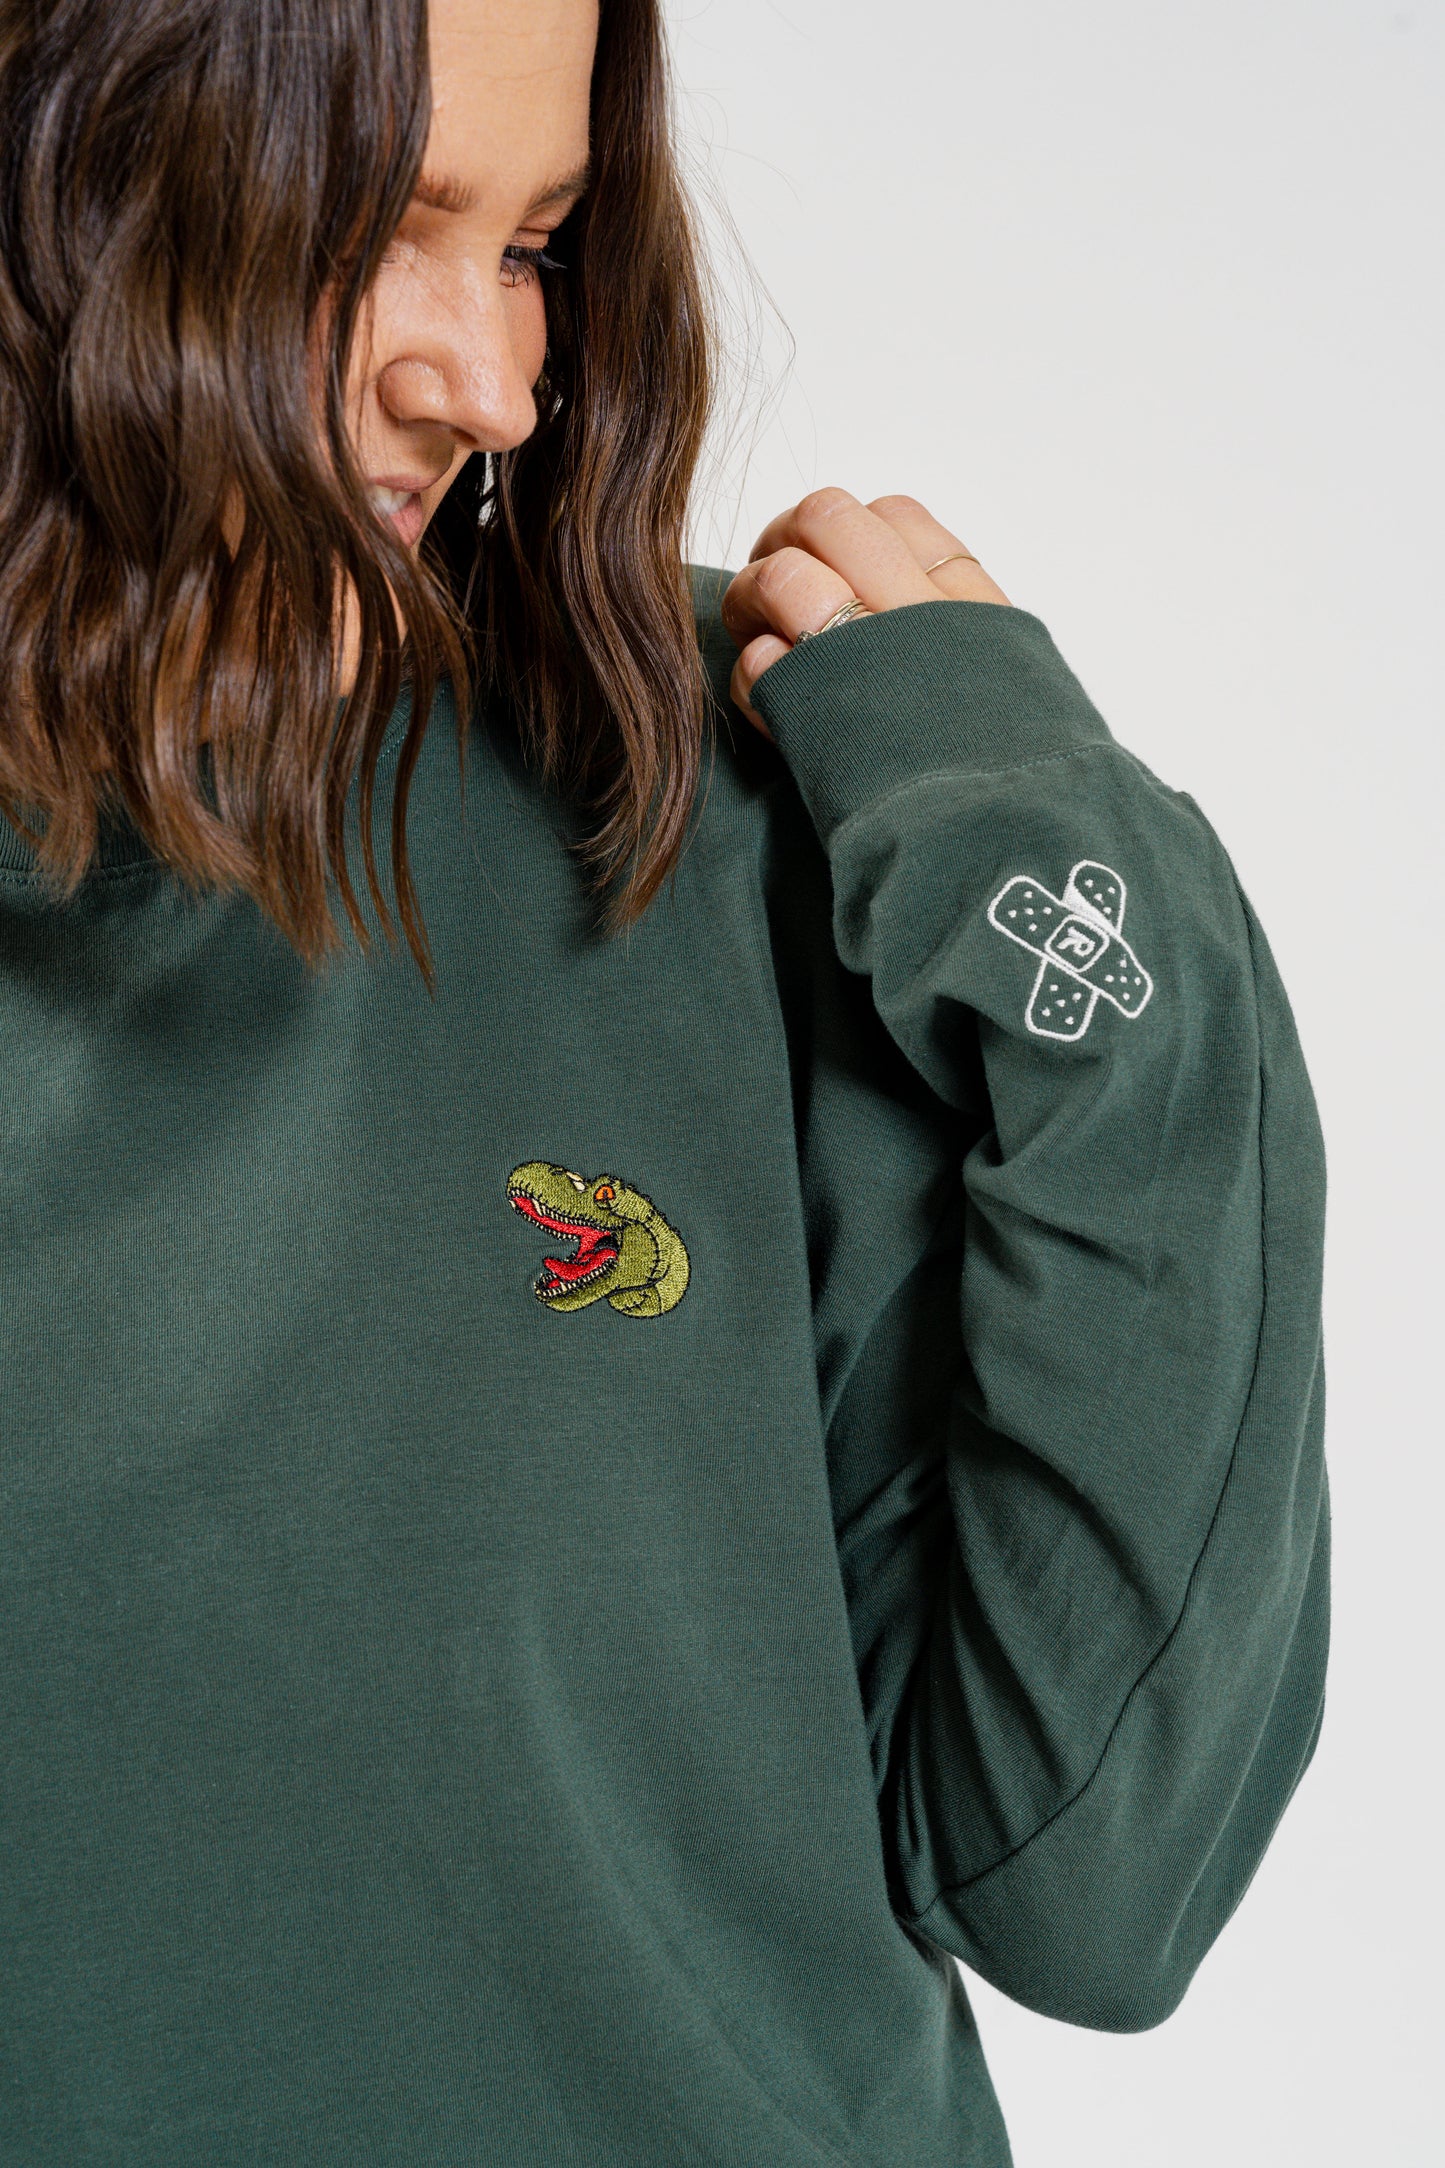 Woman wearing green dinosaur themed sweater with embodied rexy dinosaur